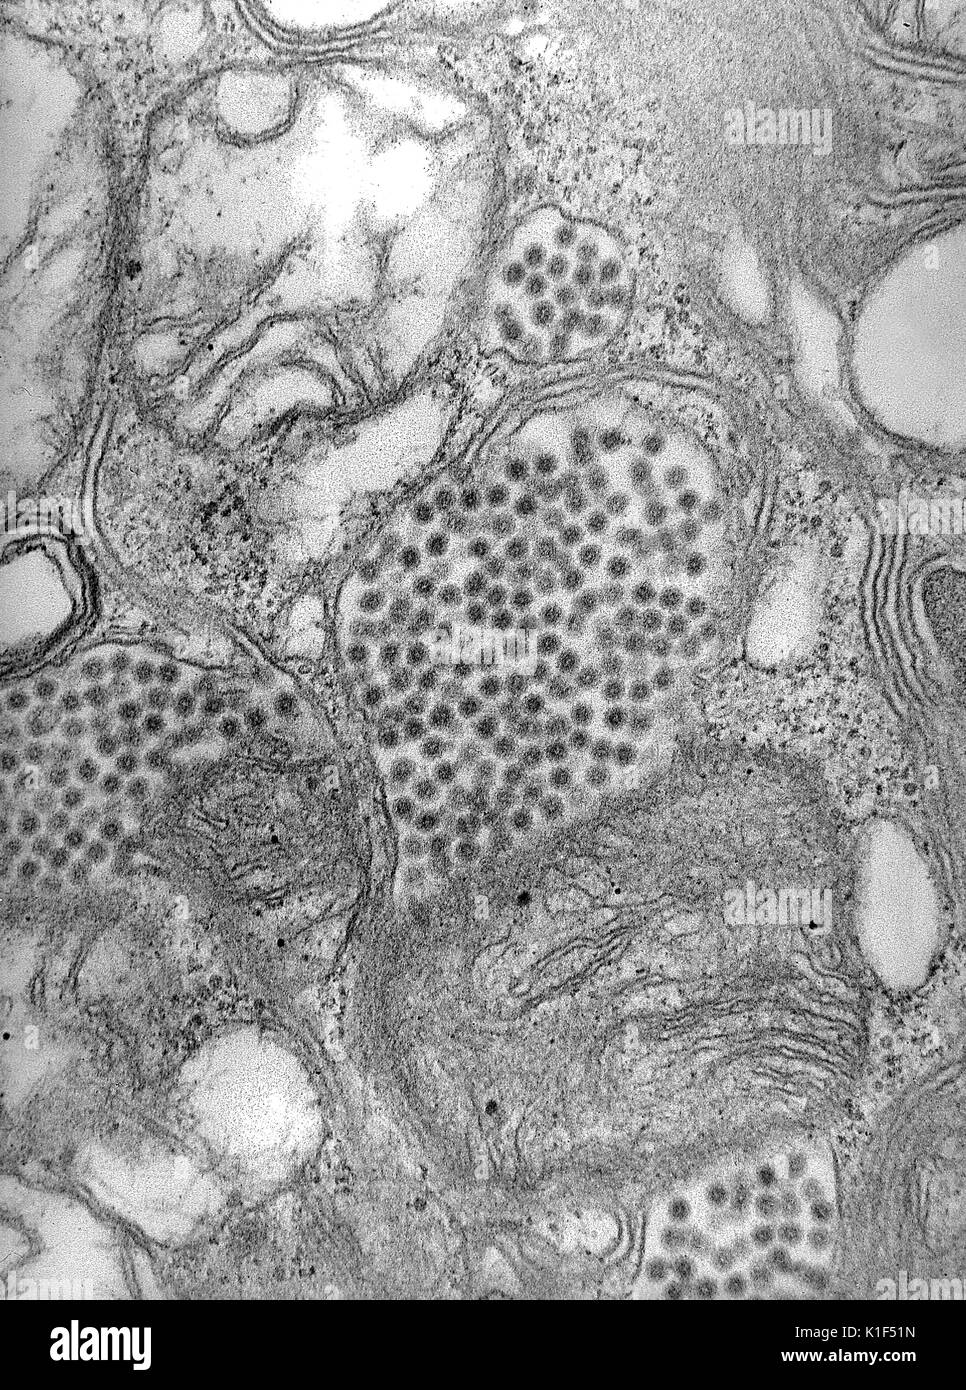 Electron micrograph of the Eastern Equine Encephalitis virus in a mosquito salivary gland, Alphavirus, EEE. Image courtesy CDC/Dr. Fred Murphy, Sylvia Whitfield, 1975. Stock Photo